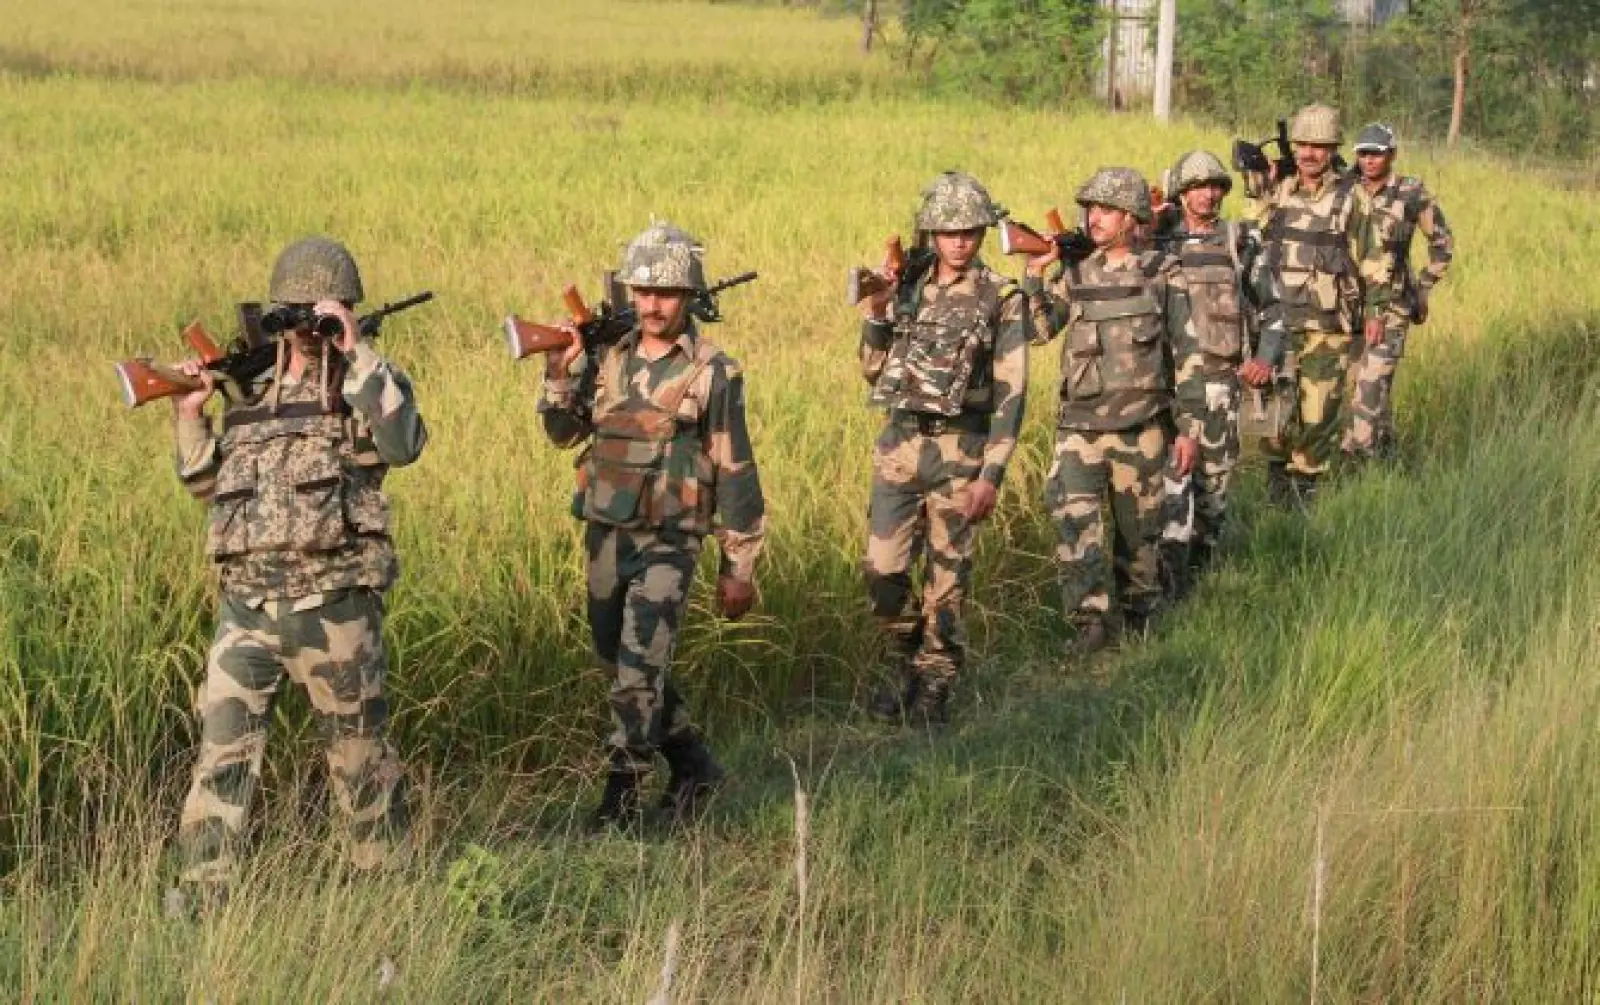 BSF foils cattle smuggling on India-Bangladesh border, miscreants escape after fatally attacking a jawan